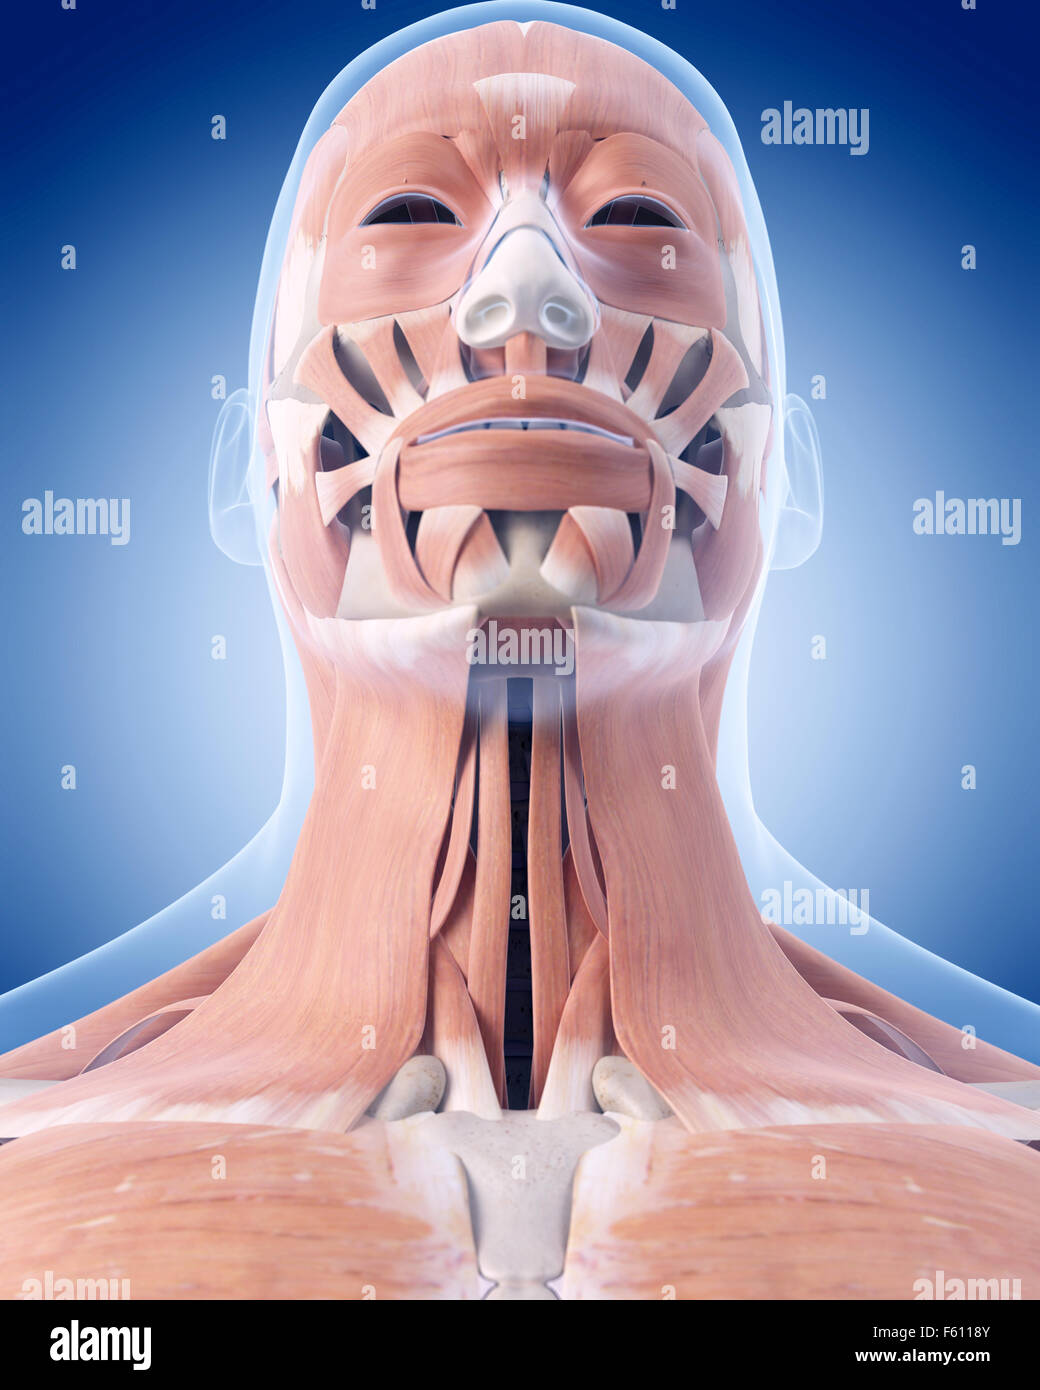 medically accurate illustration of the neck muscles Stock Photo